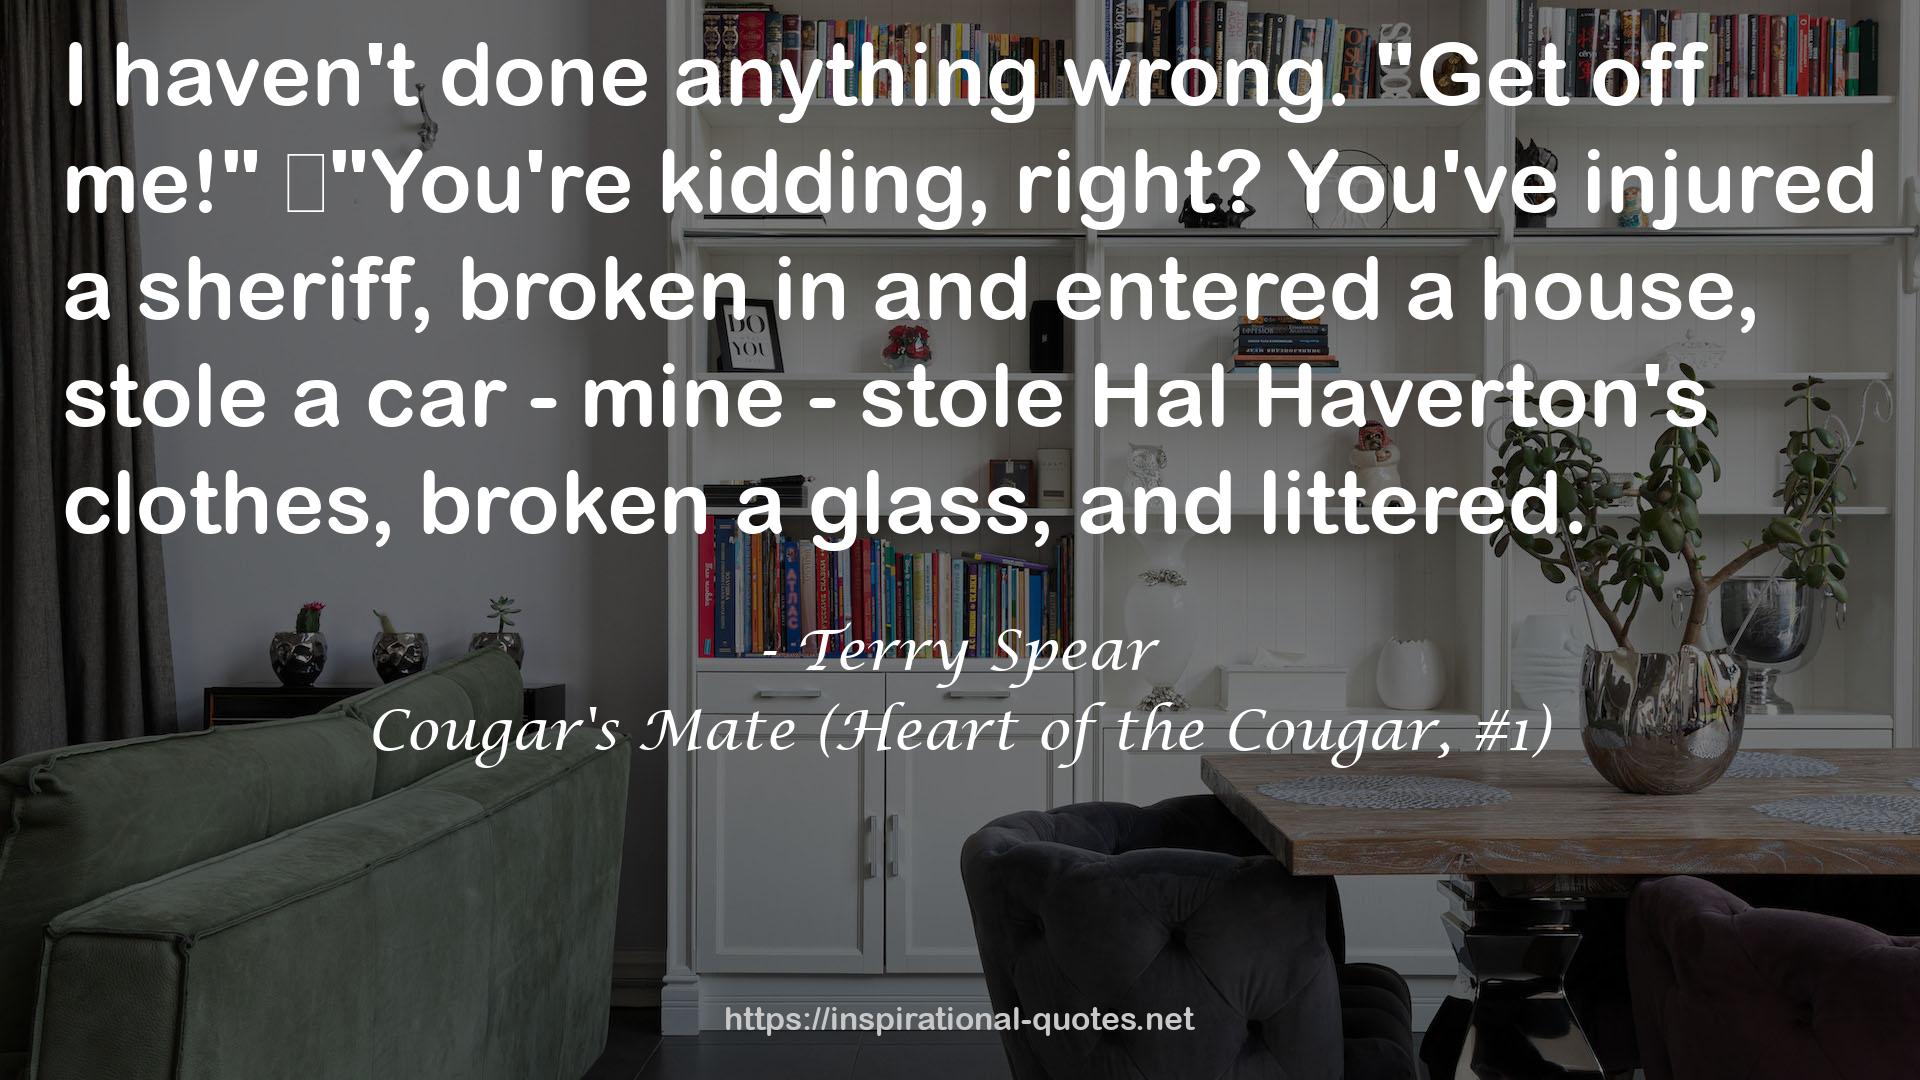 Cougar's Mate (Heart of the Cougar, #1) QUOTES